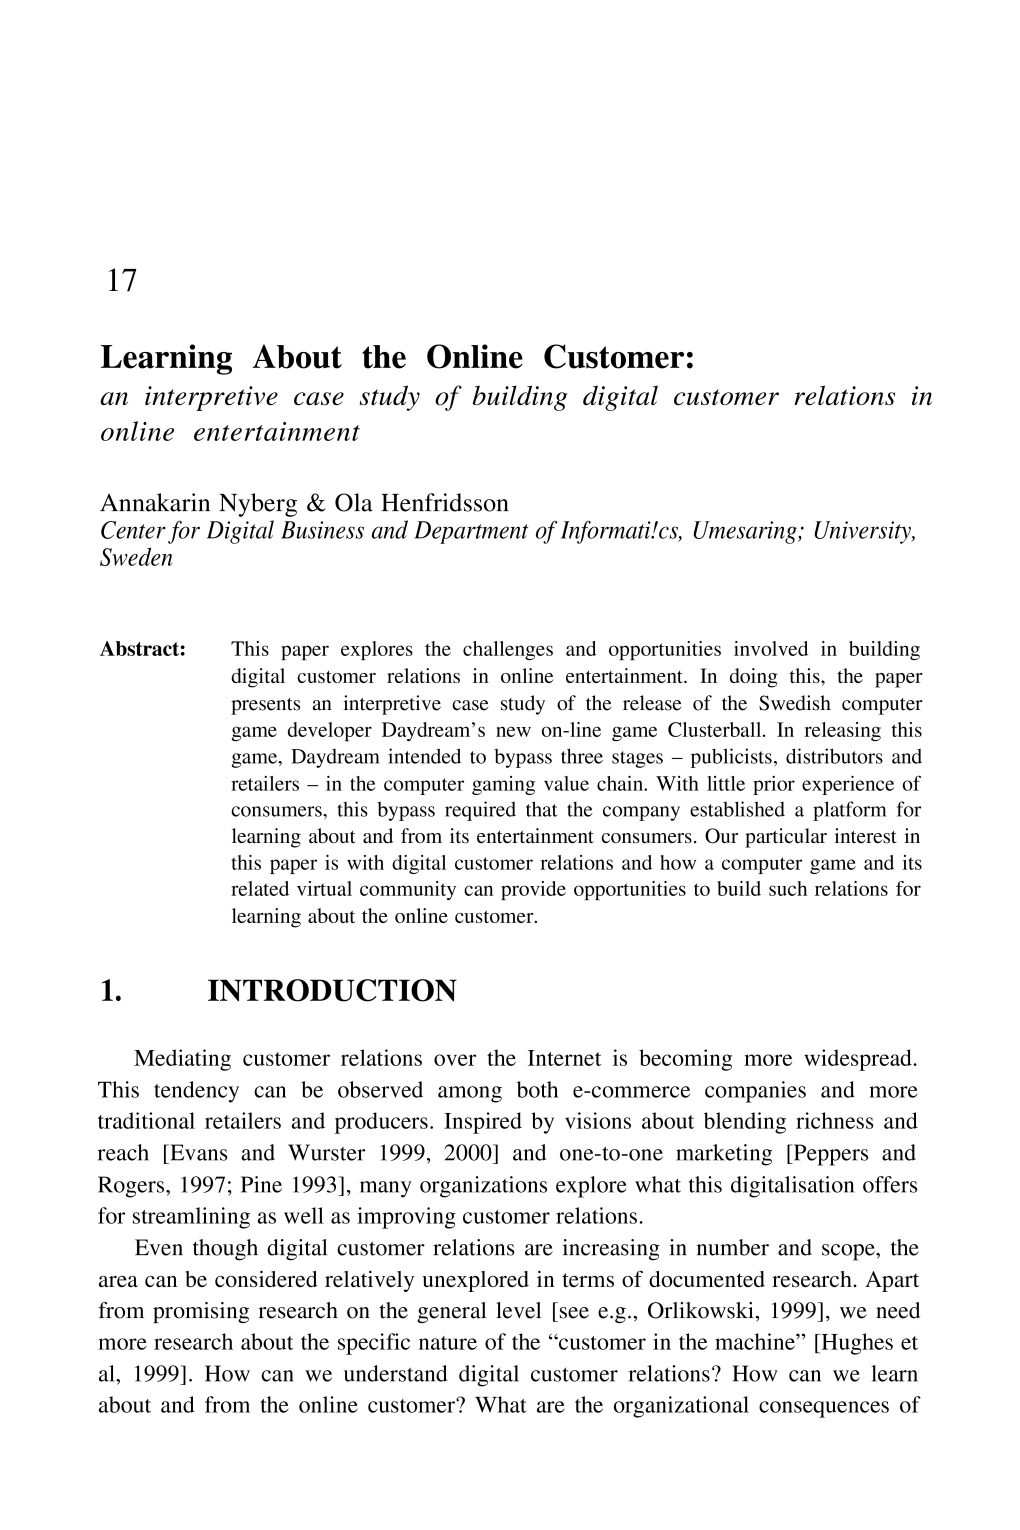 Learning About the Online Customer: an Interpretive Case Study of Building Digital Customer Relations in Online Entertainment